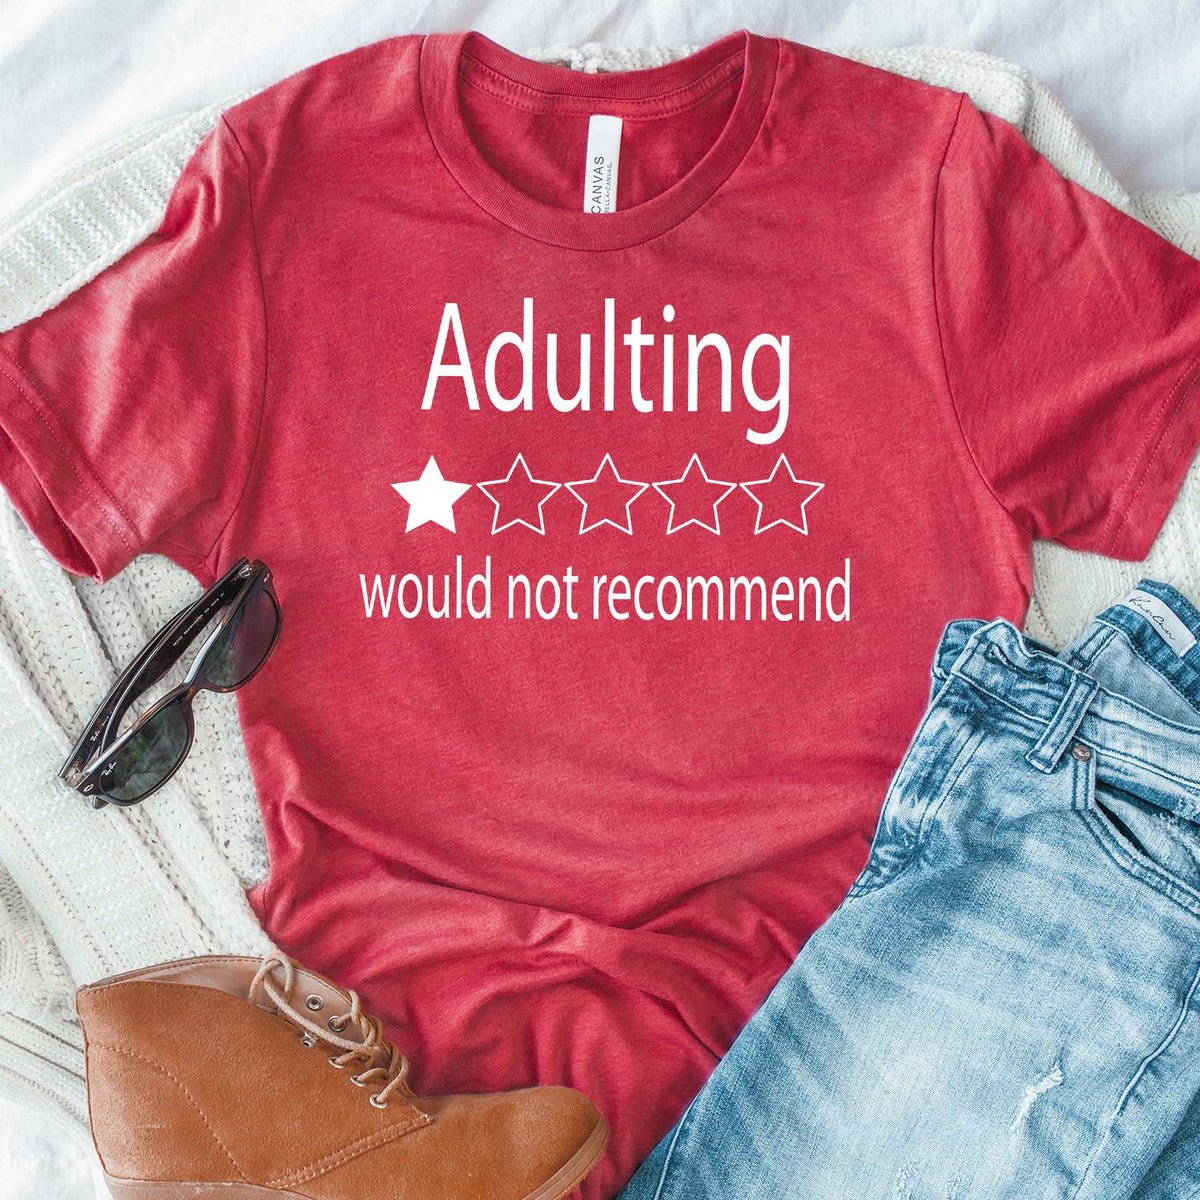 Adulting Would Not Recommend - Short Sleeve Tee Shirt